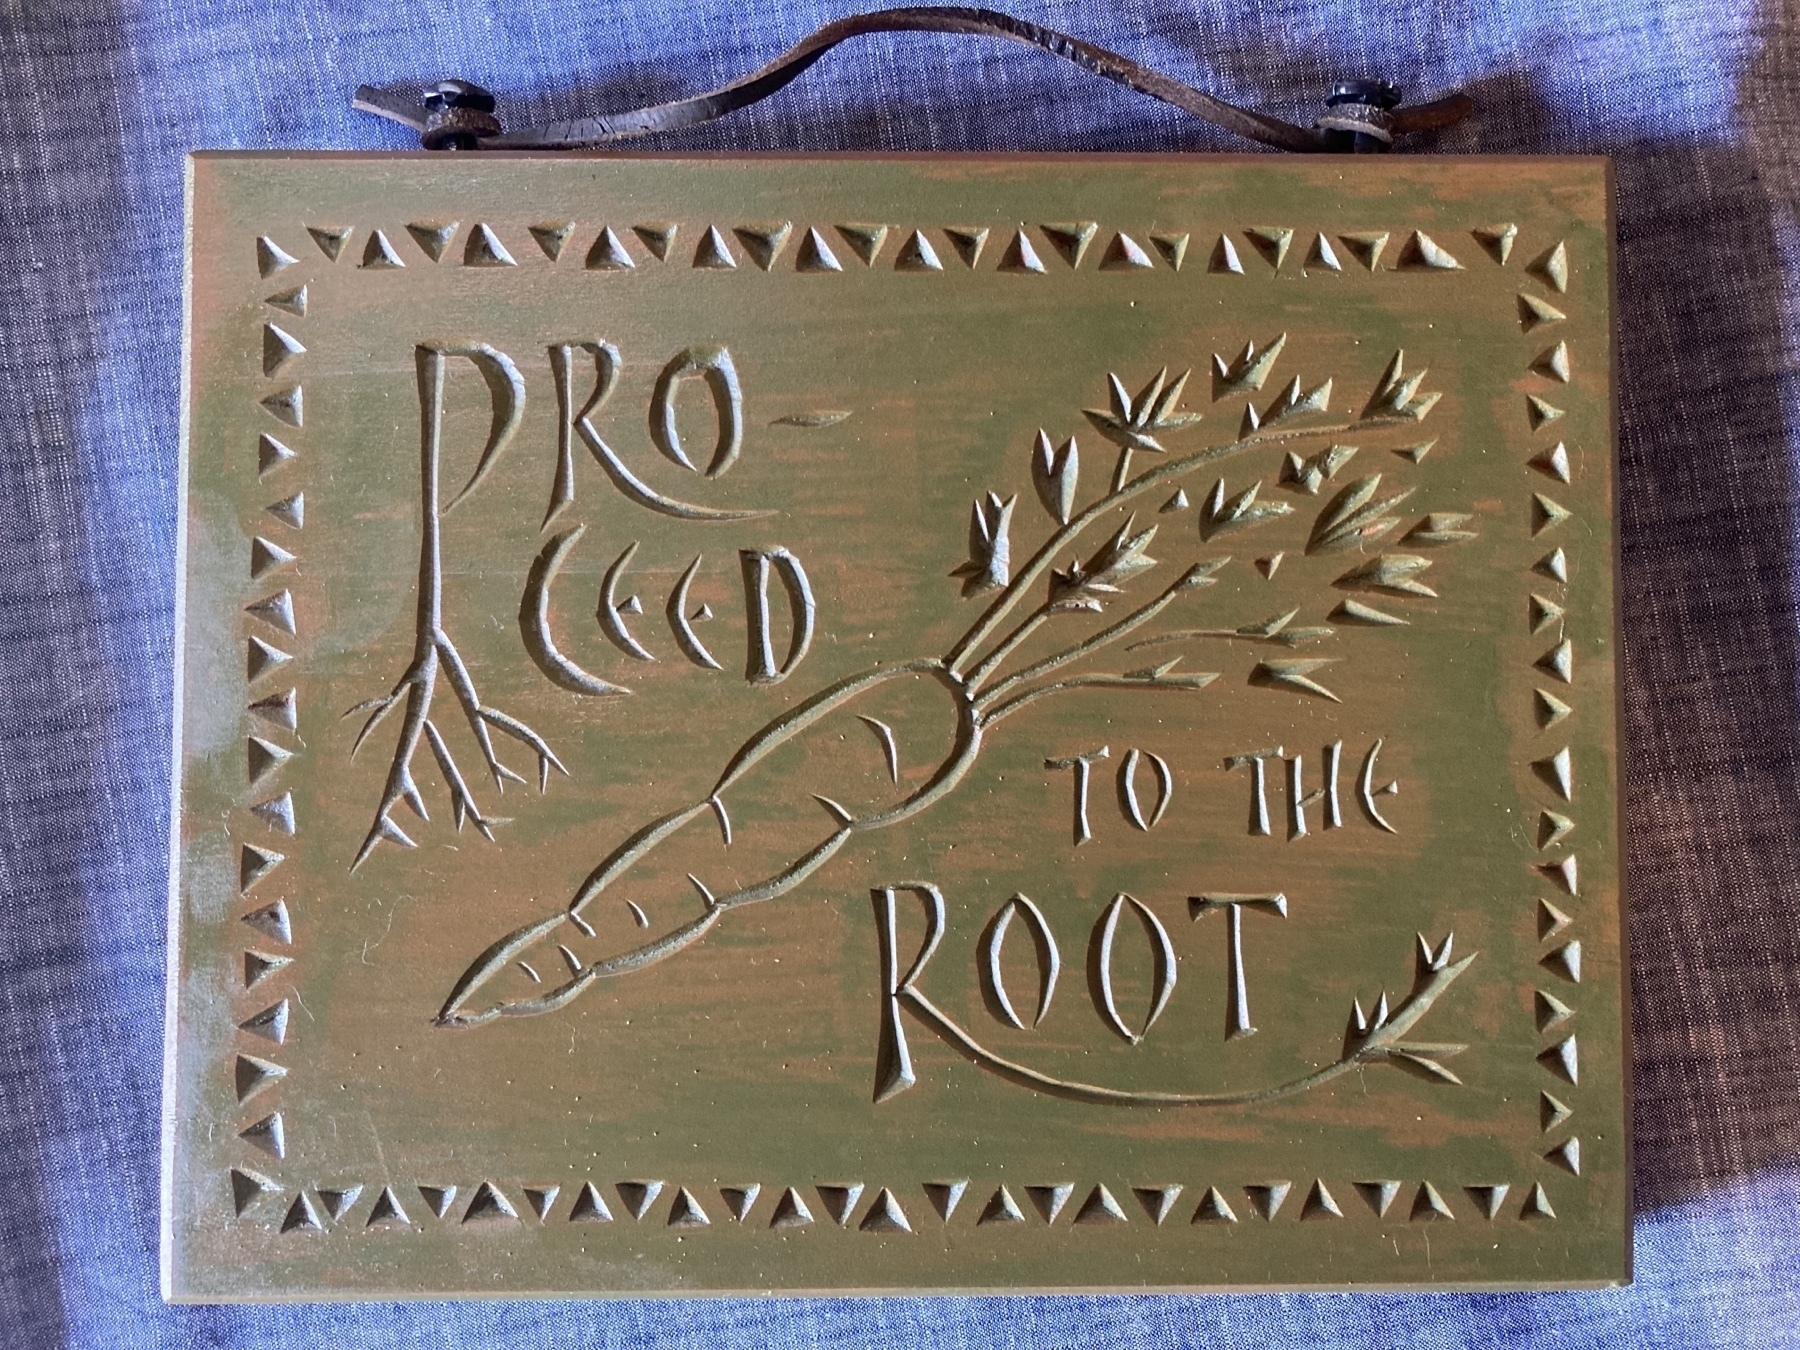 wood carving of carrot with legend proceed to the root